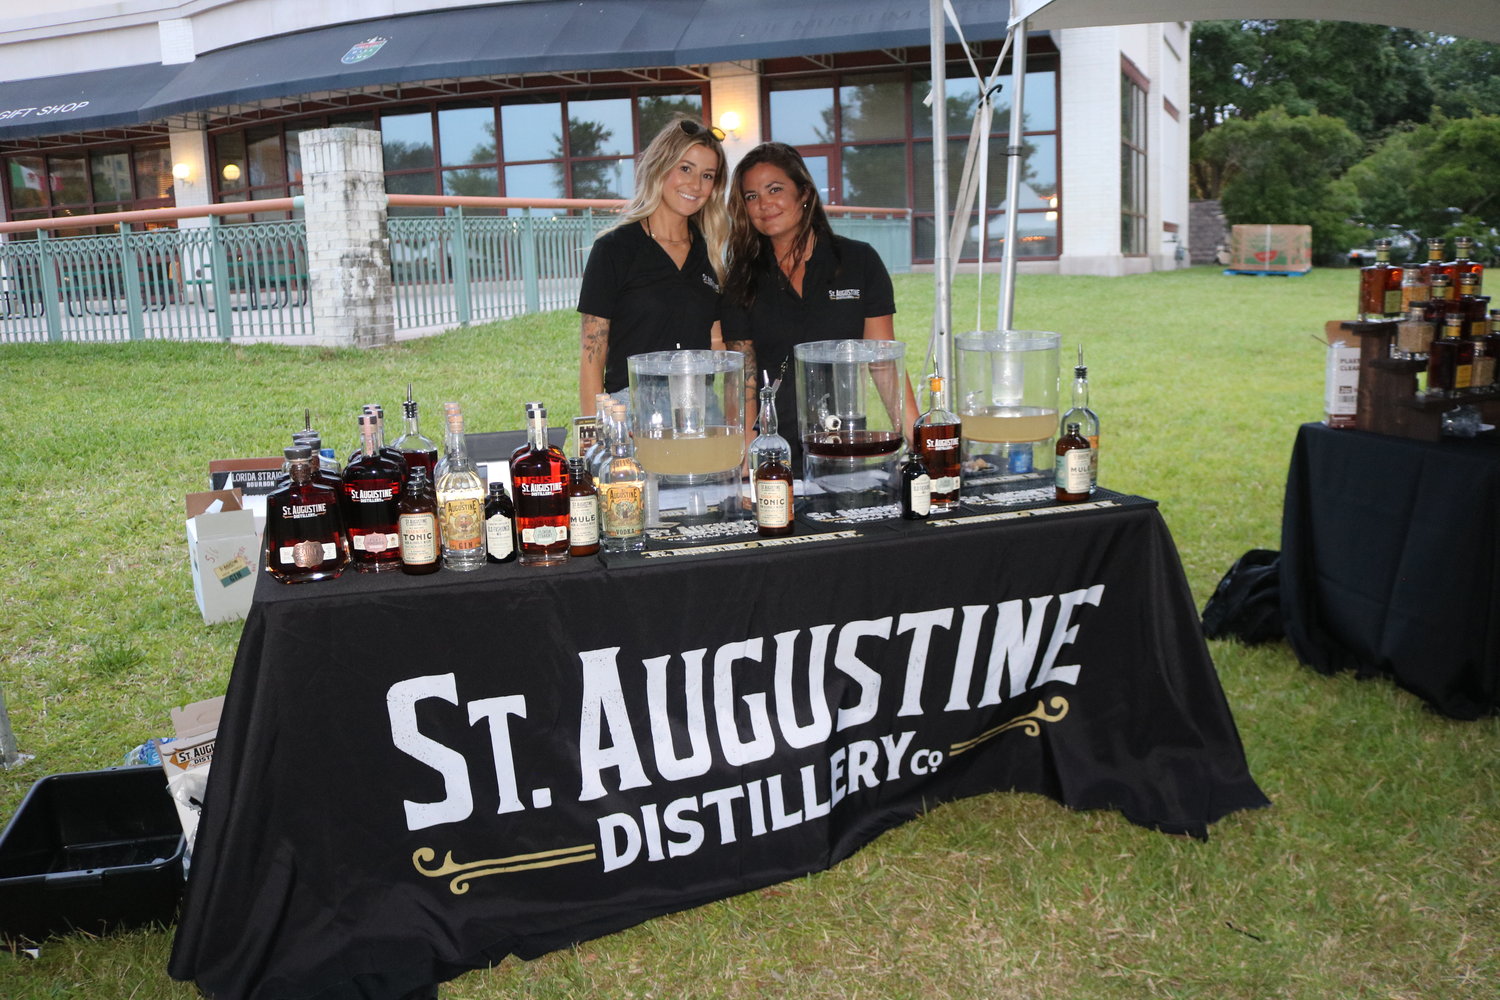 St. Augustine Distillery was setup at the St. Augustine’s Food & Wine Festival’s Smoke on the Walk May 6.